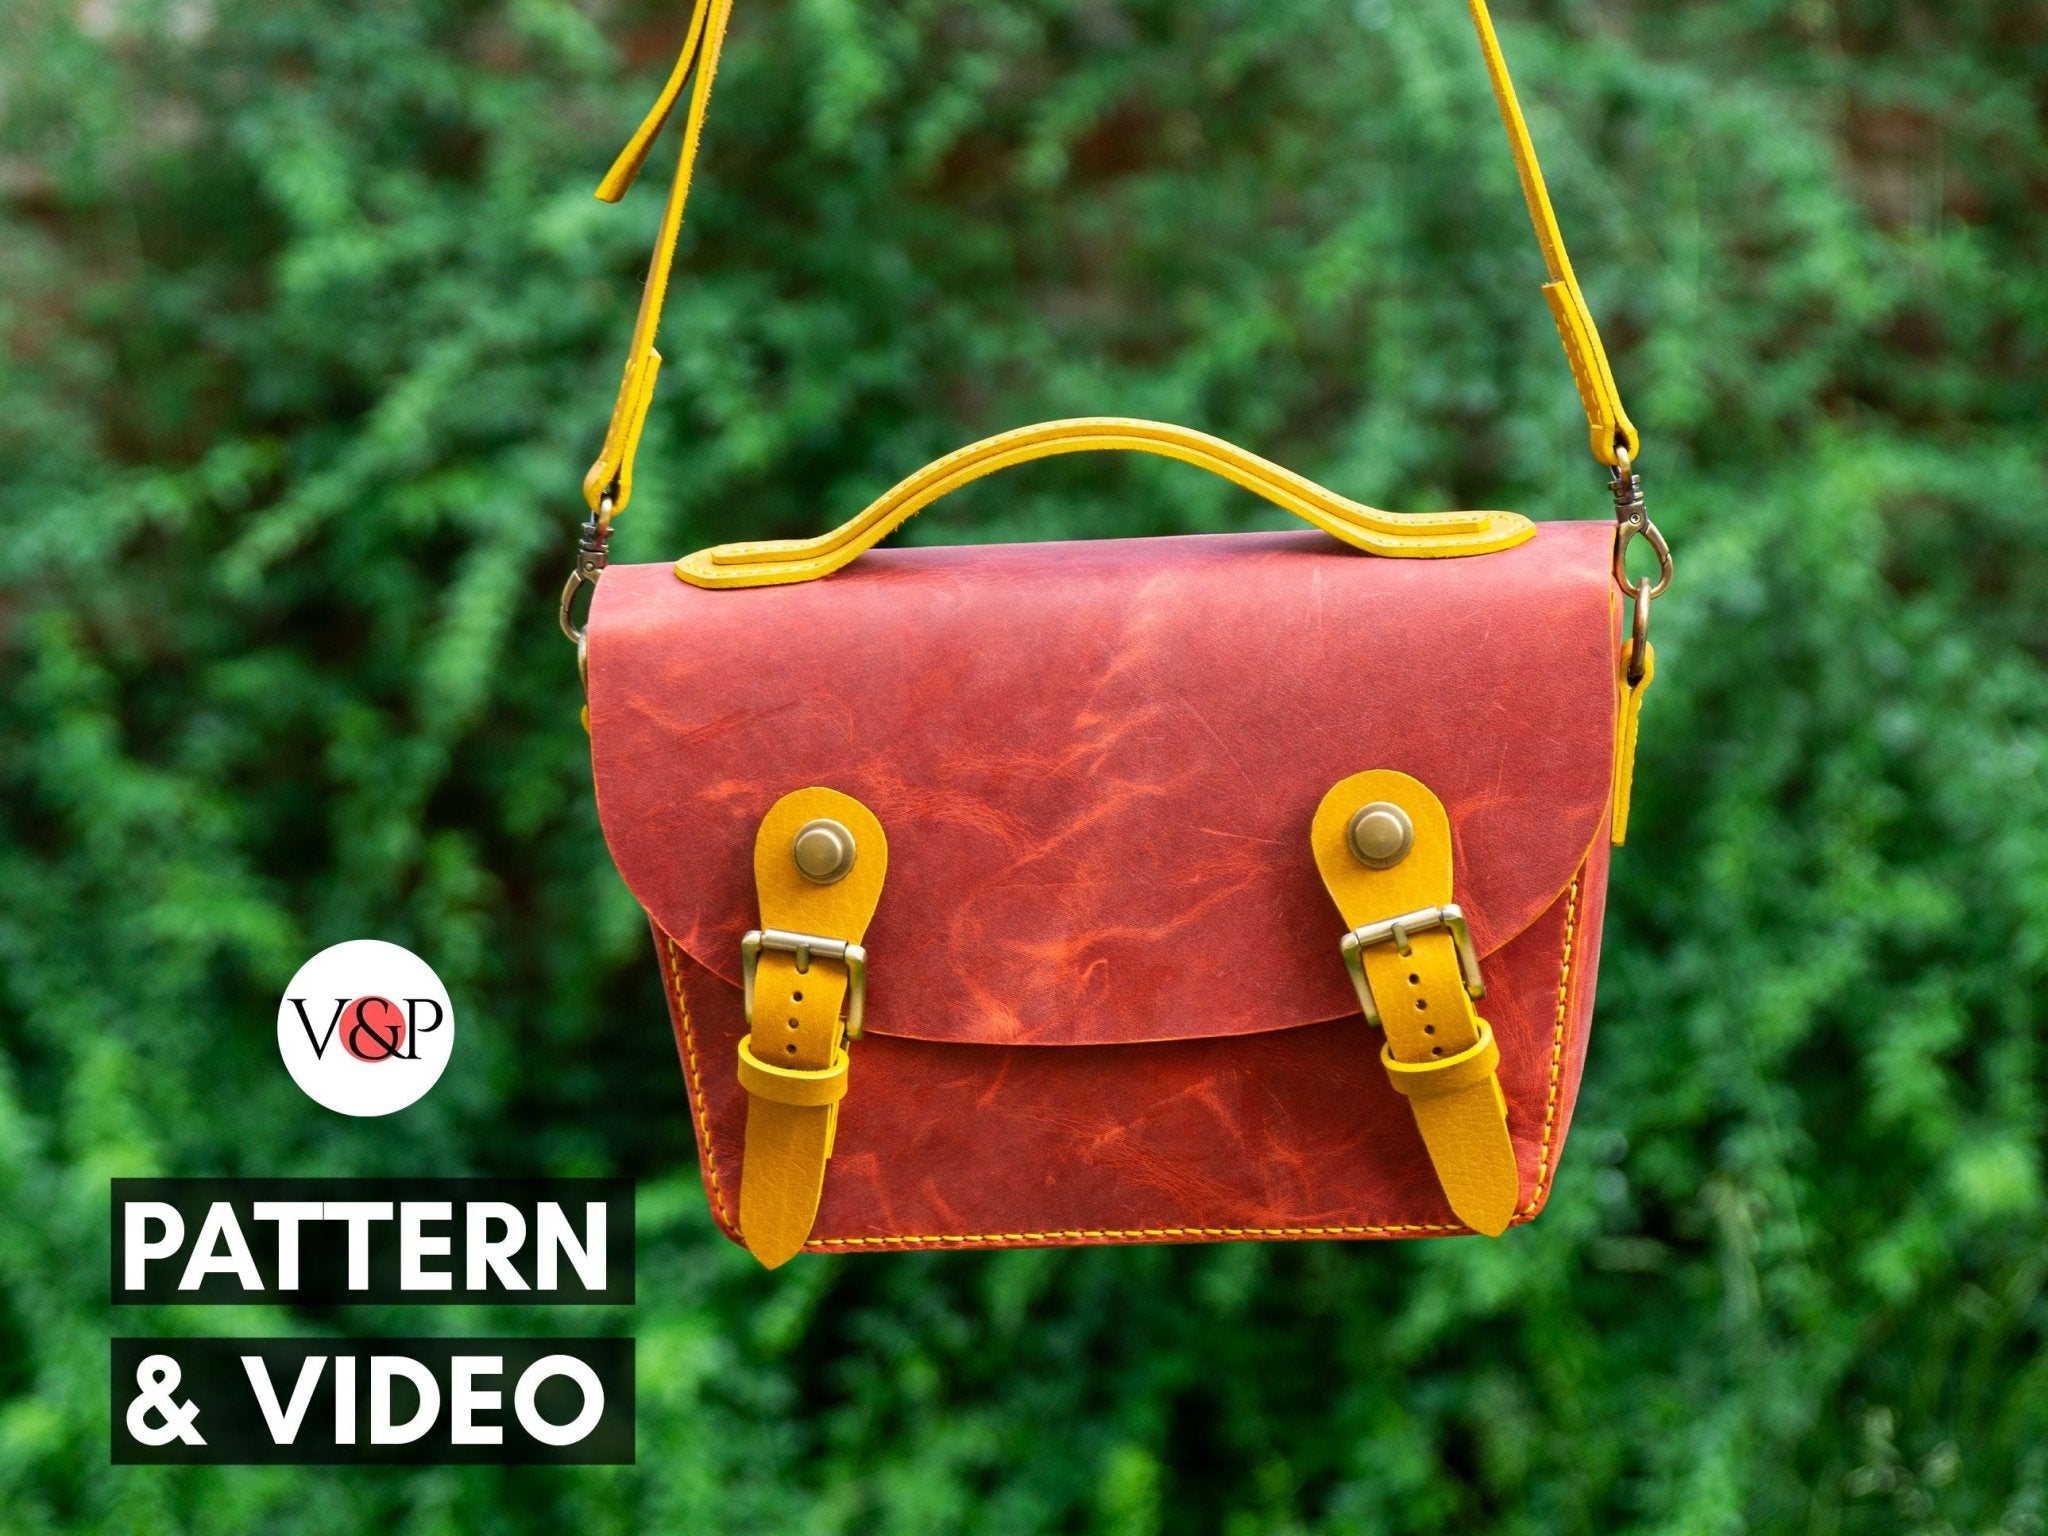 Leather satchel pattern PDF - Reel to reel player - by